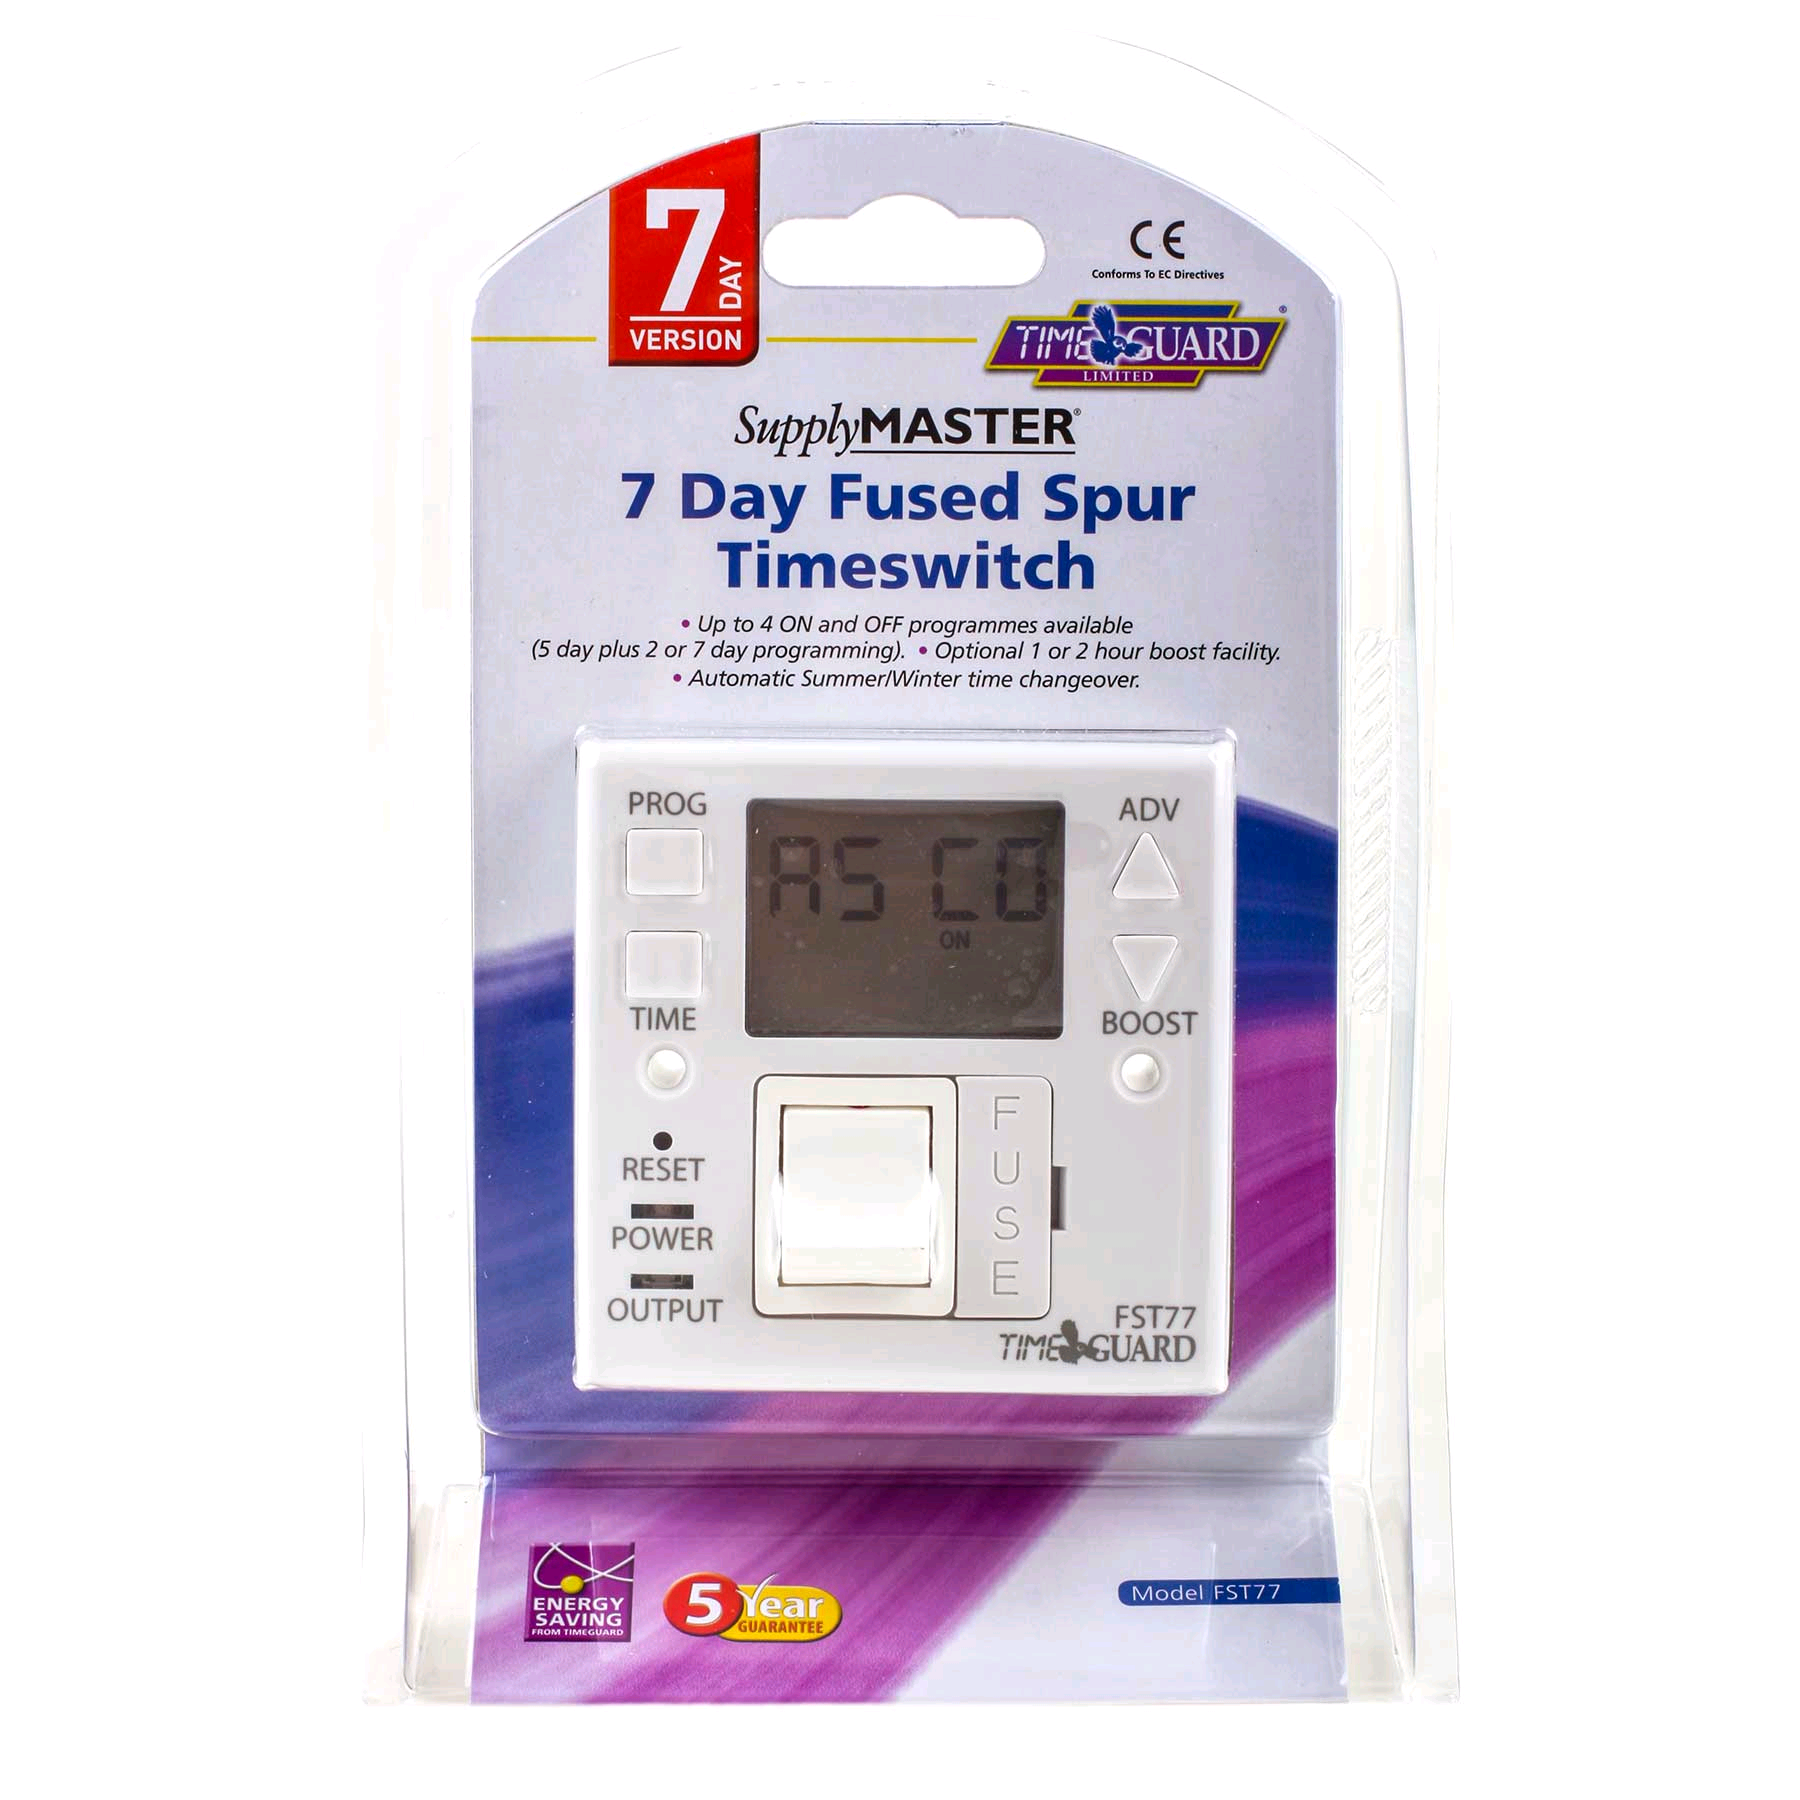 Timeguard Fused Spur Timeswitch 7 Day